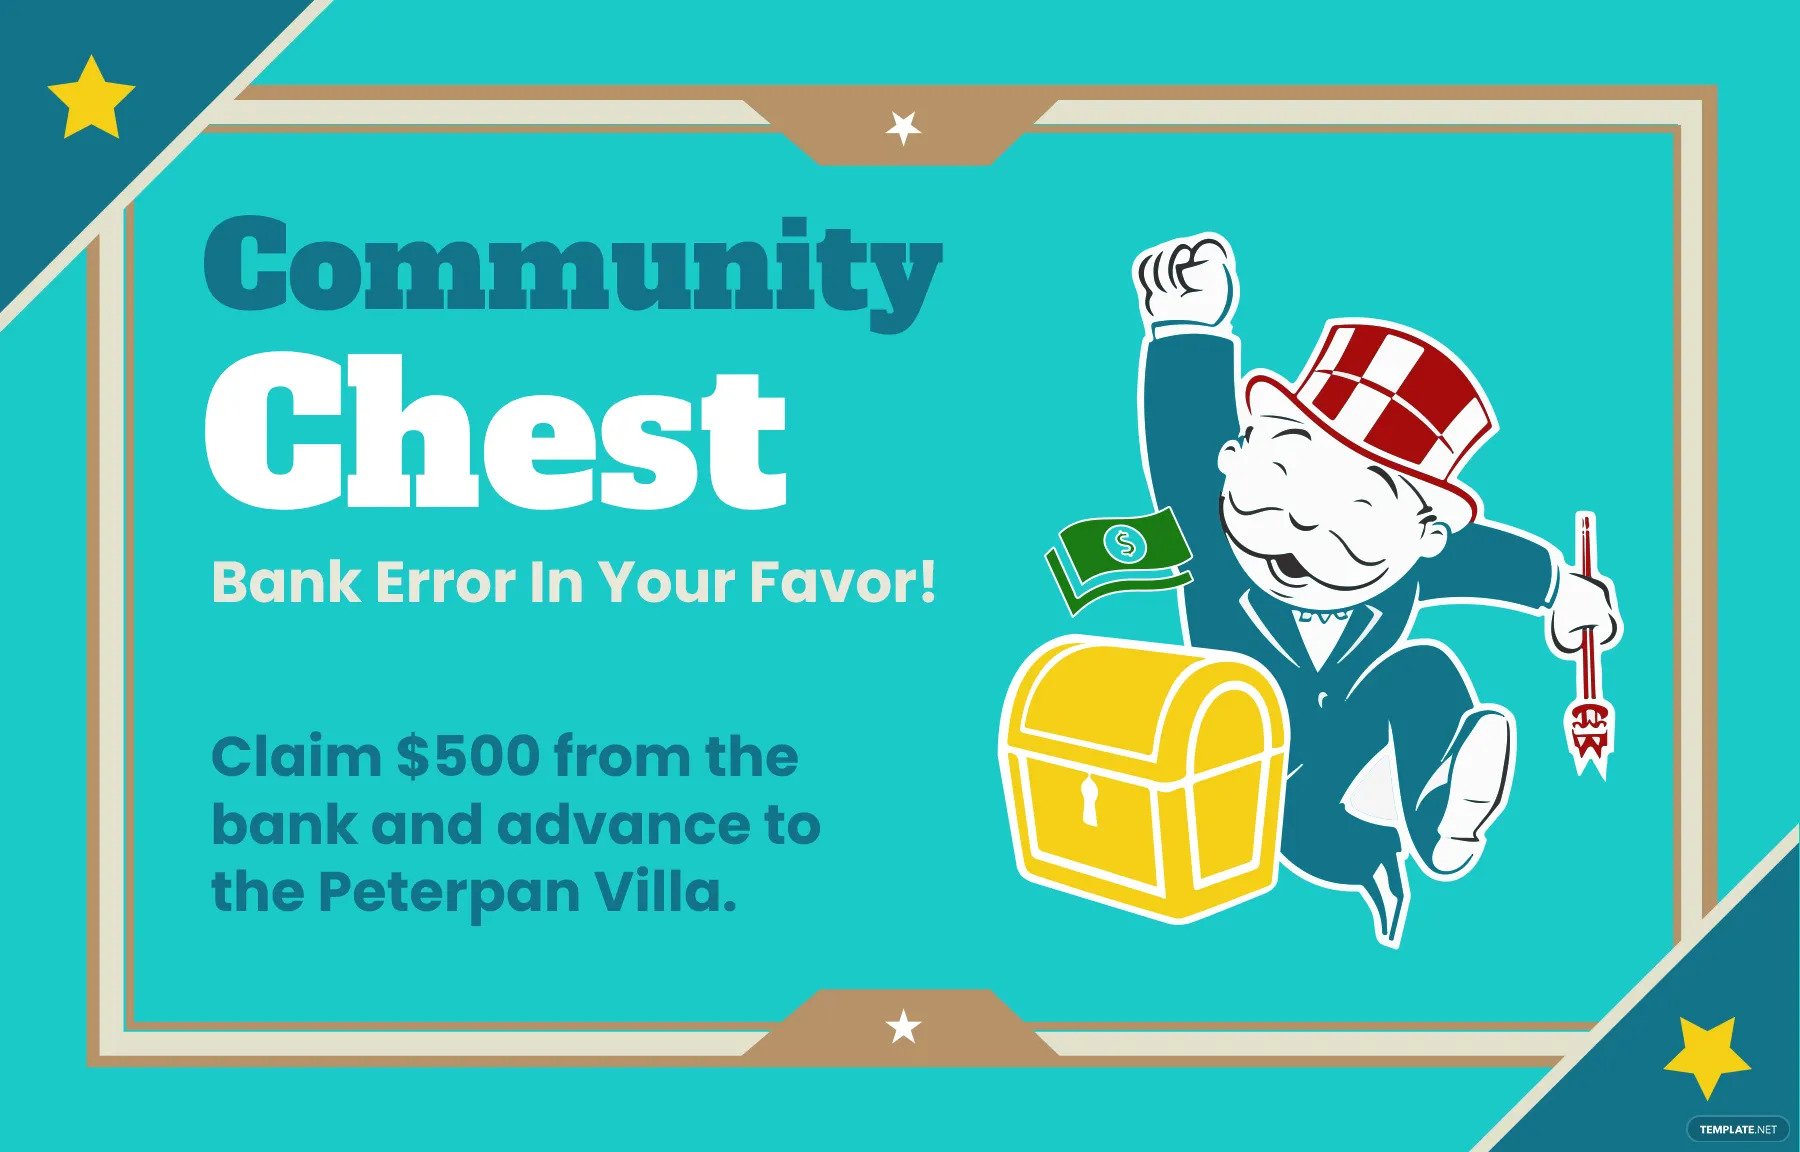 monopoly community chest card ideas and examples